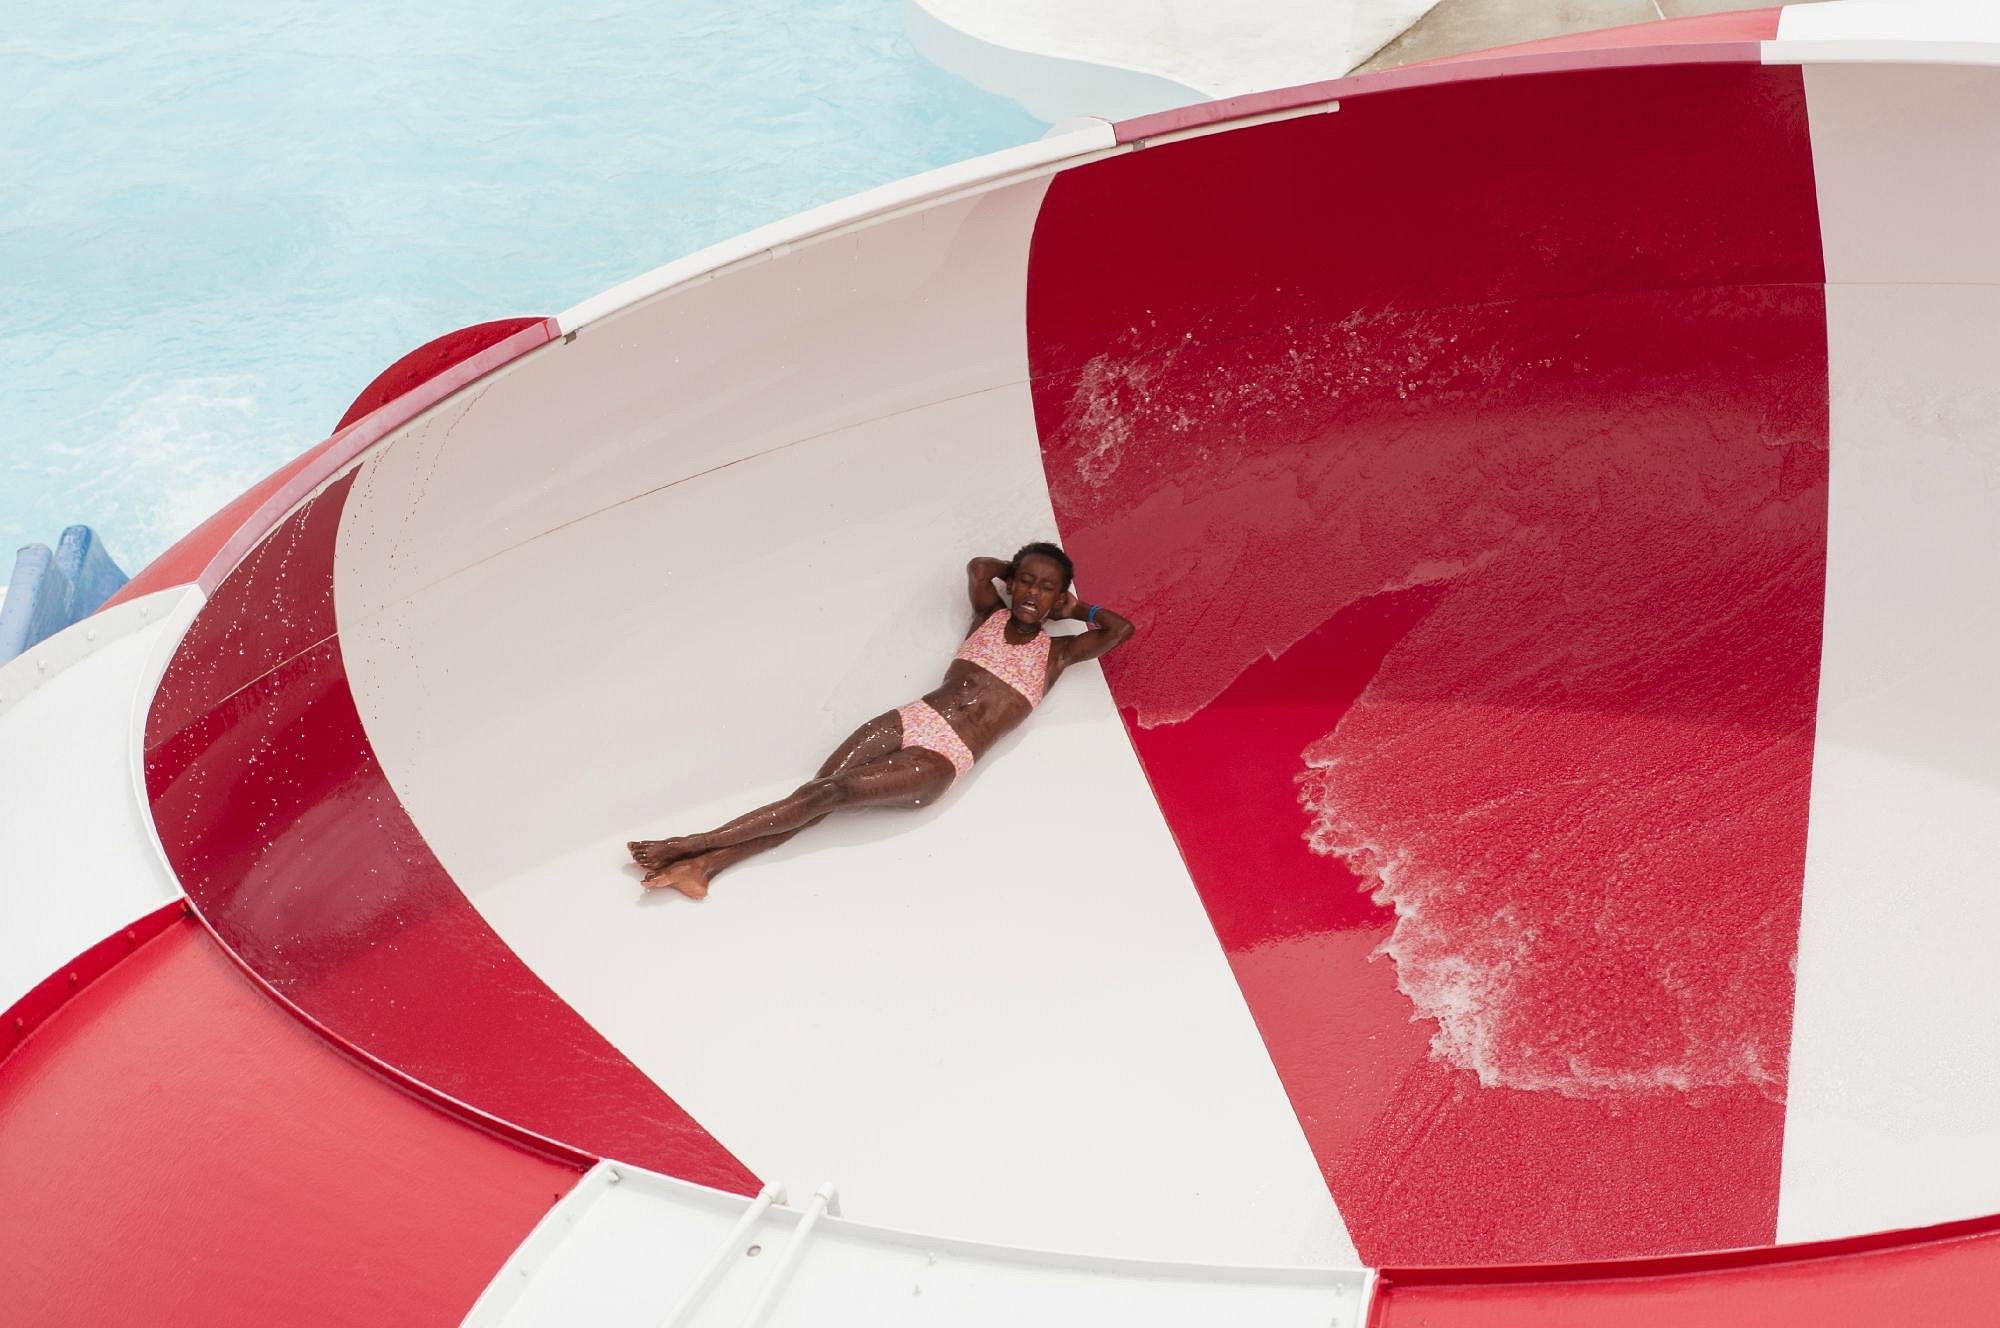 A girl slides down a red and white slide at King's Pointe